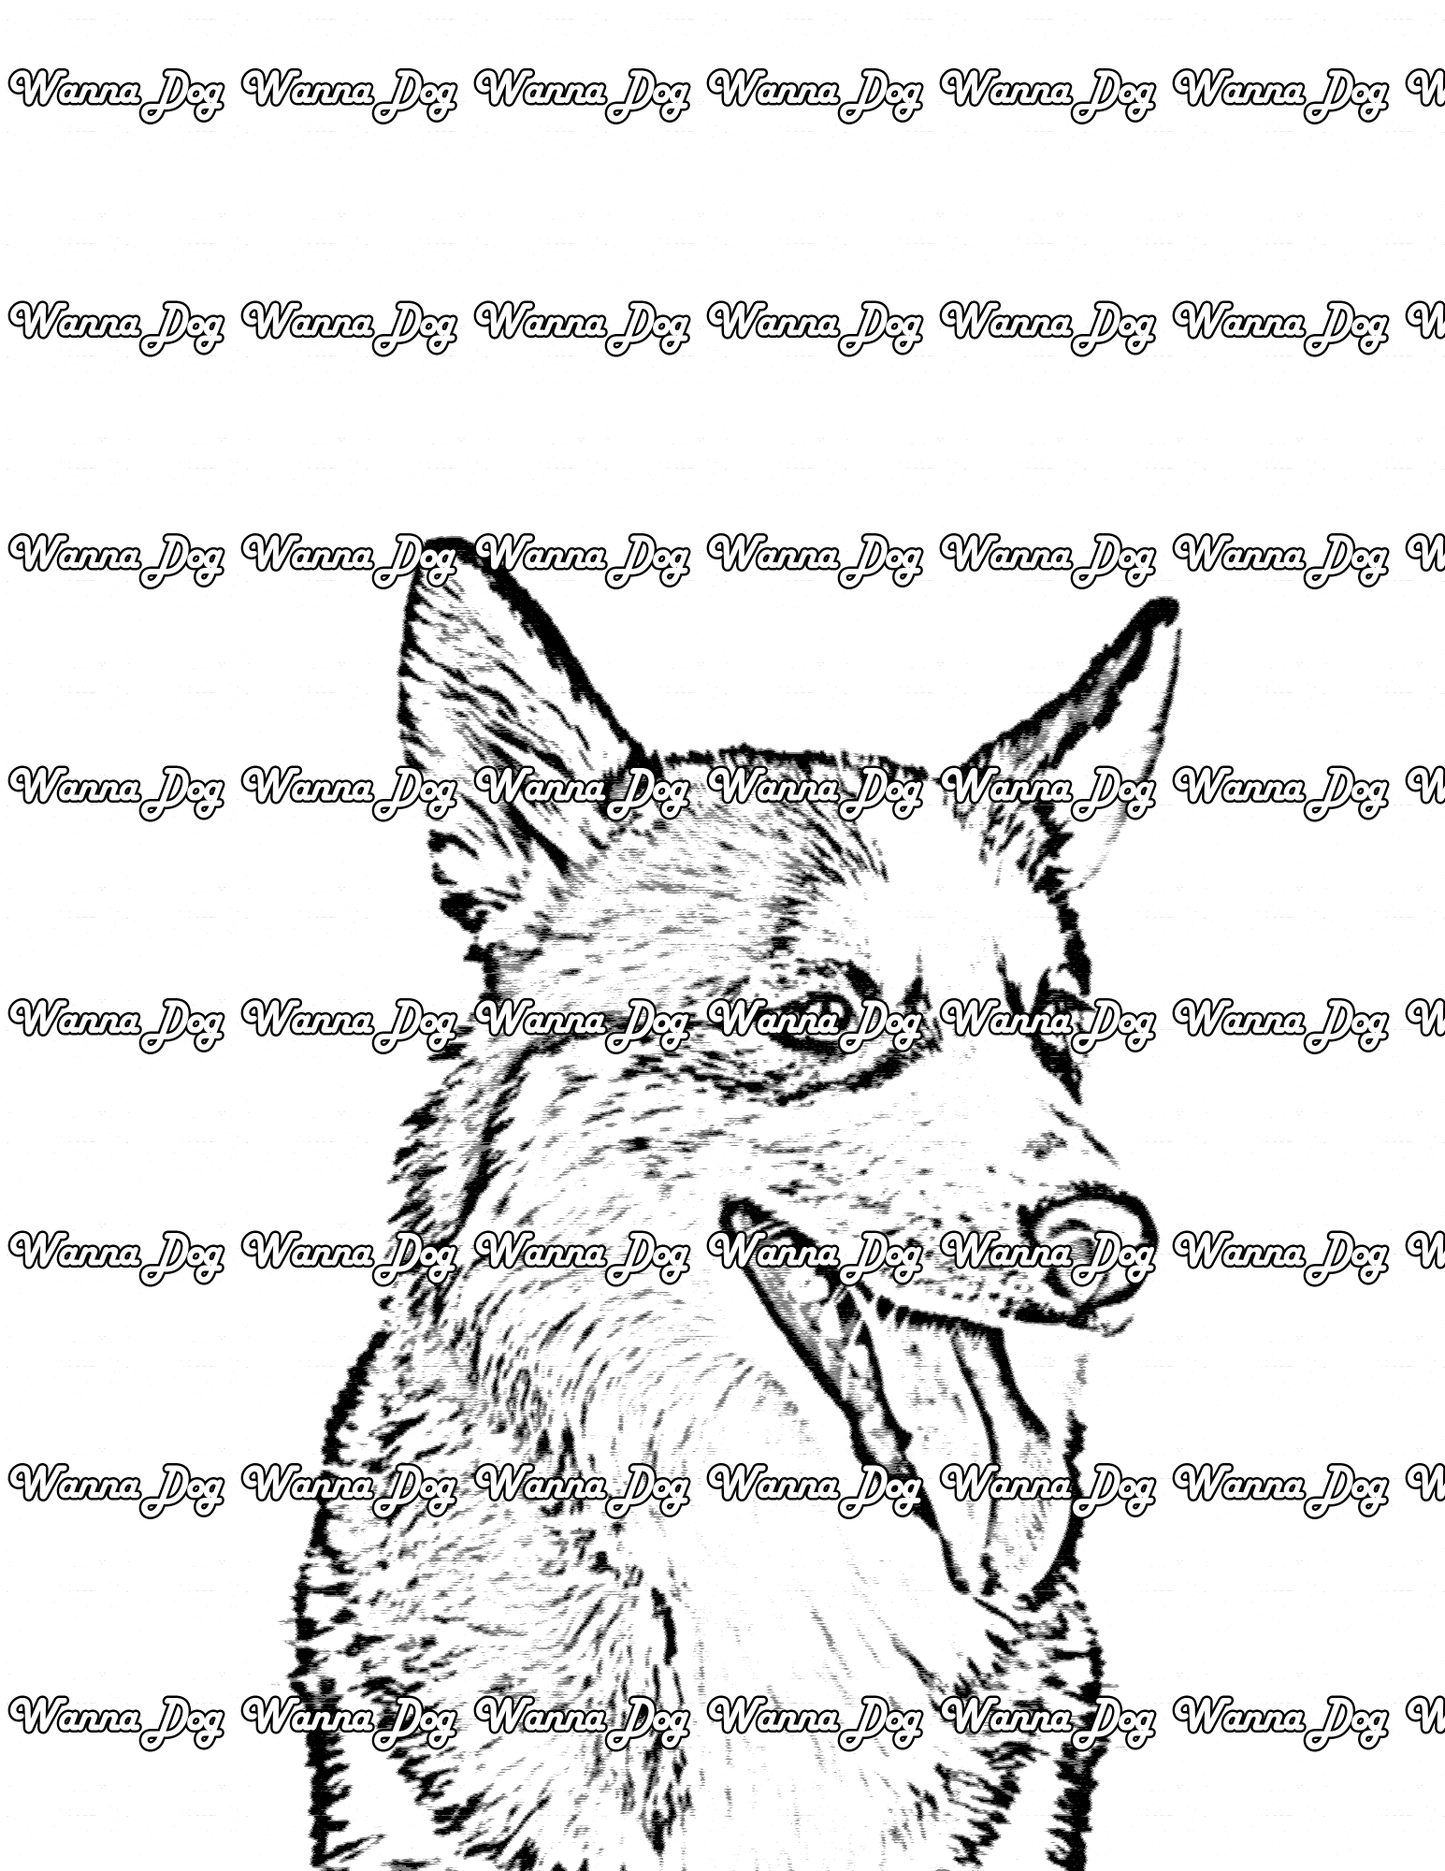 Siberian Husky Coloring Page of a Siberian Husky with their tongue out